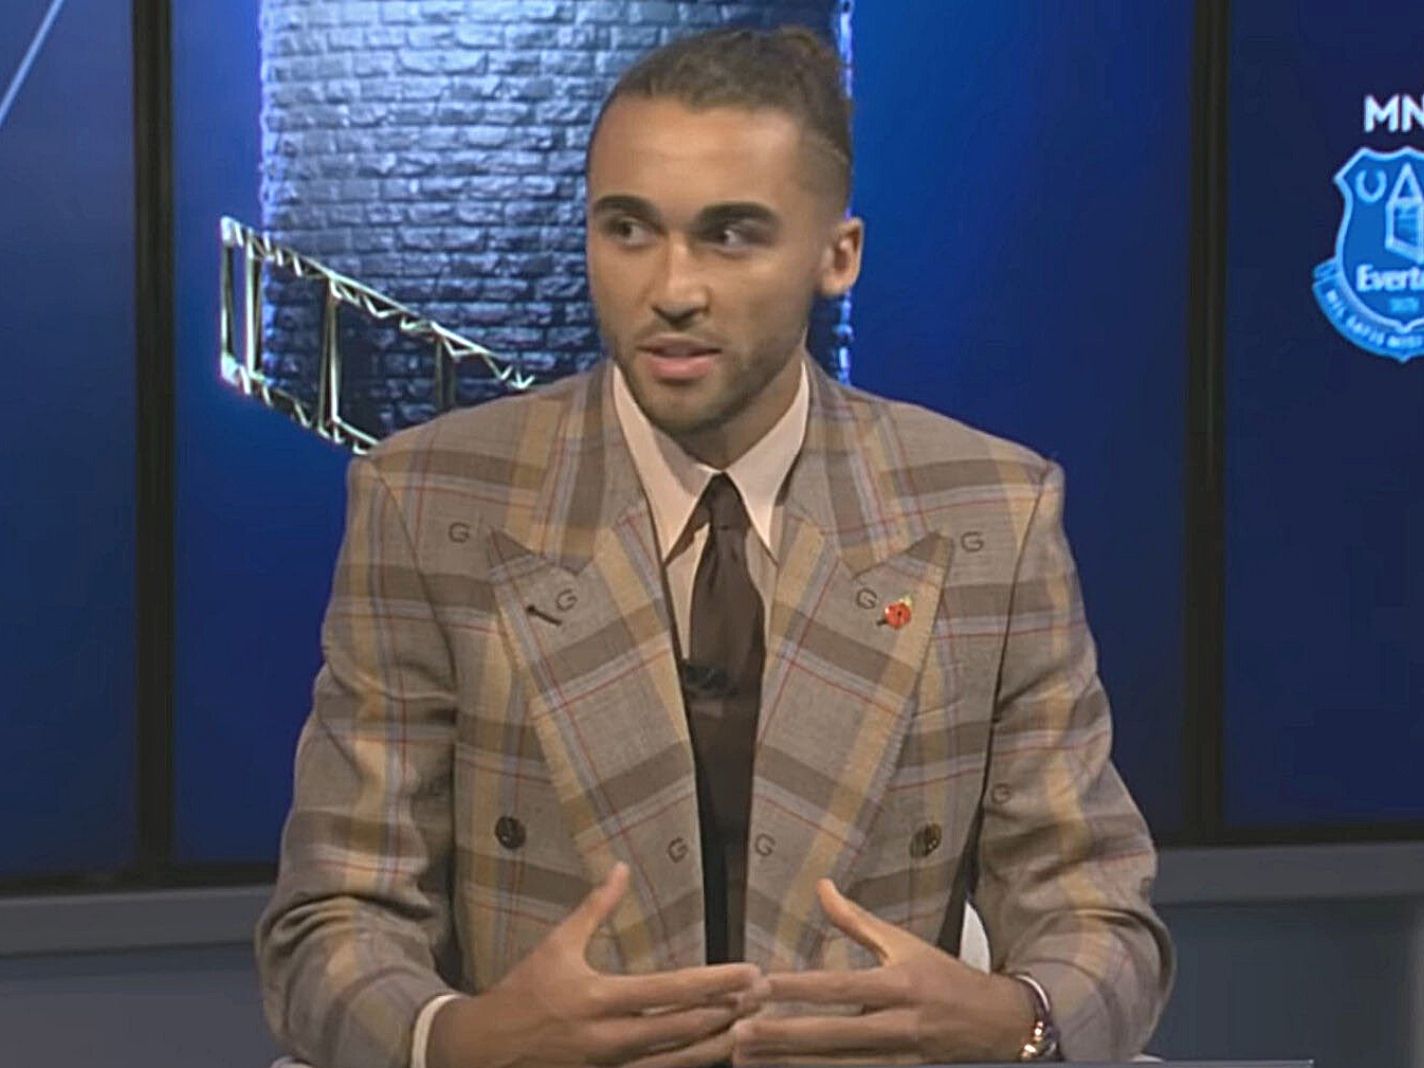 Dominic Calvert-Lewin divides opinions by wearing £3000 ‘grandad suit’ during MNF appearance